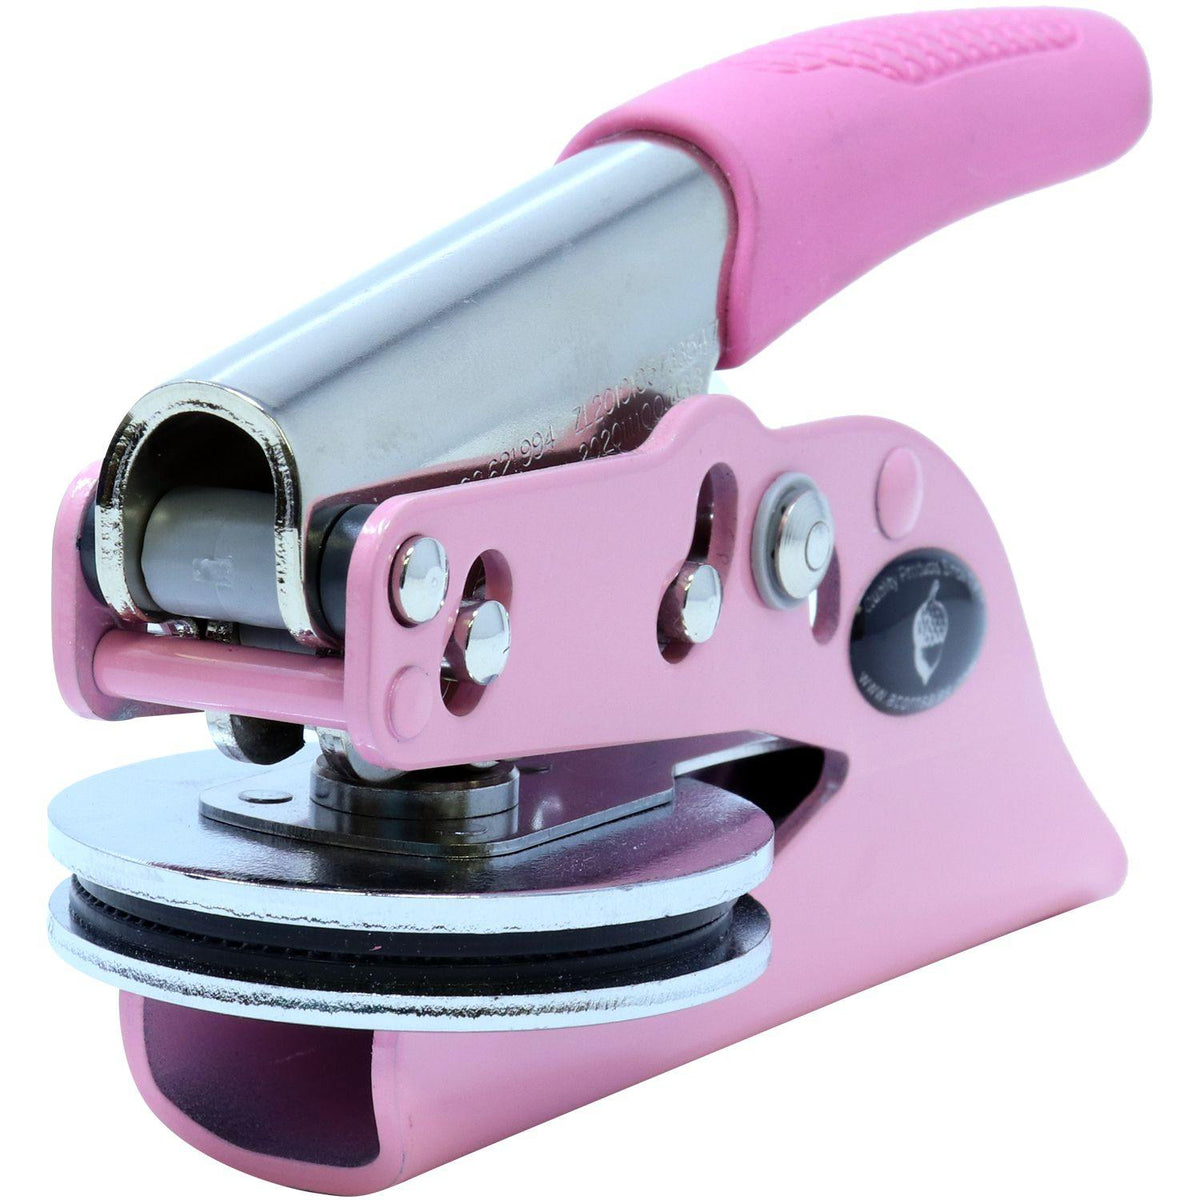 Forester Pink Soft Seal Embosser - Engineer Seal Stamps - Embosser Type_Handheld, Embosser Type_Soft Seal, Type of Use_Professional